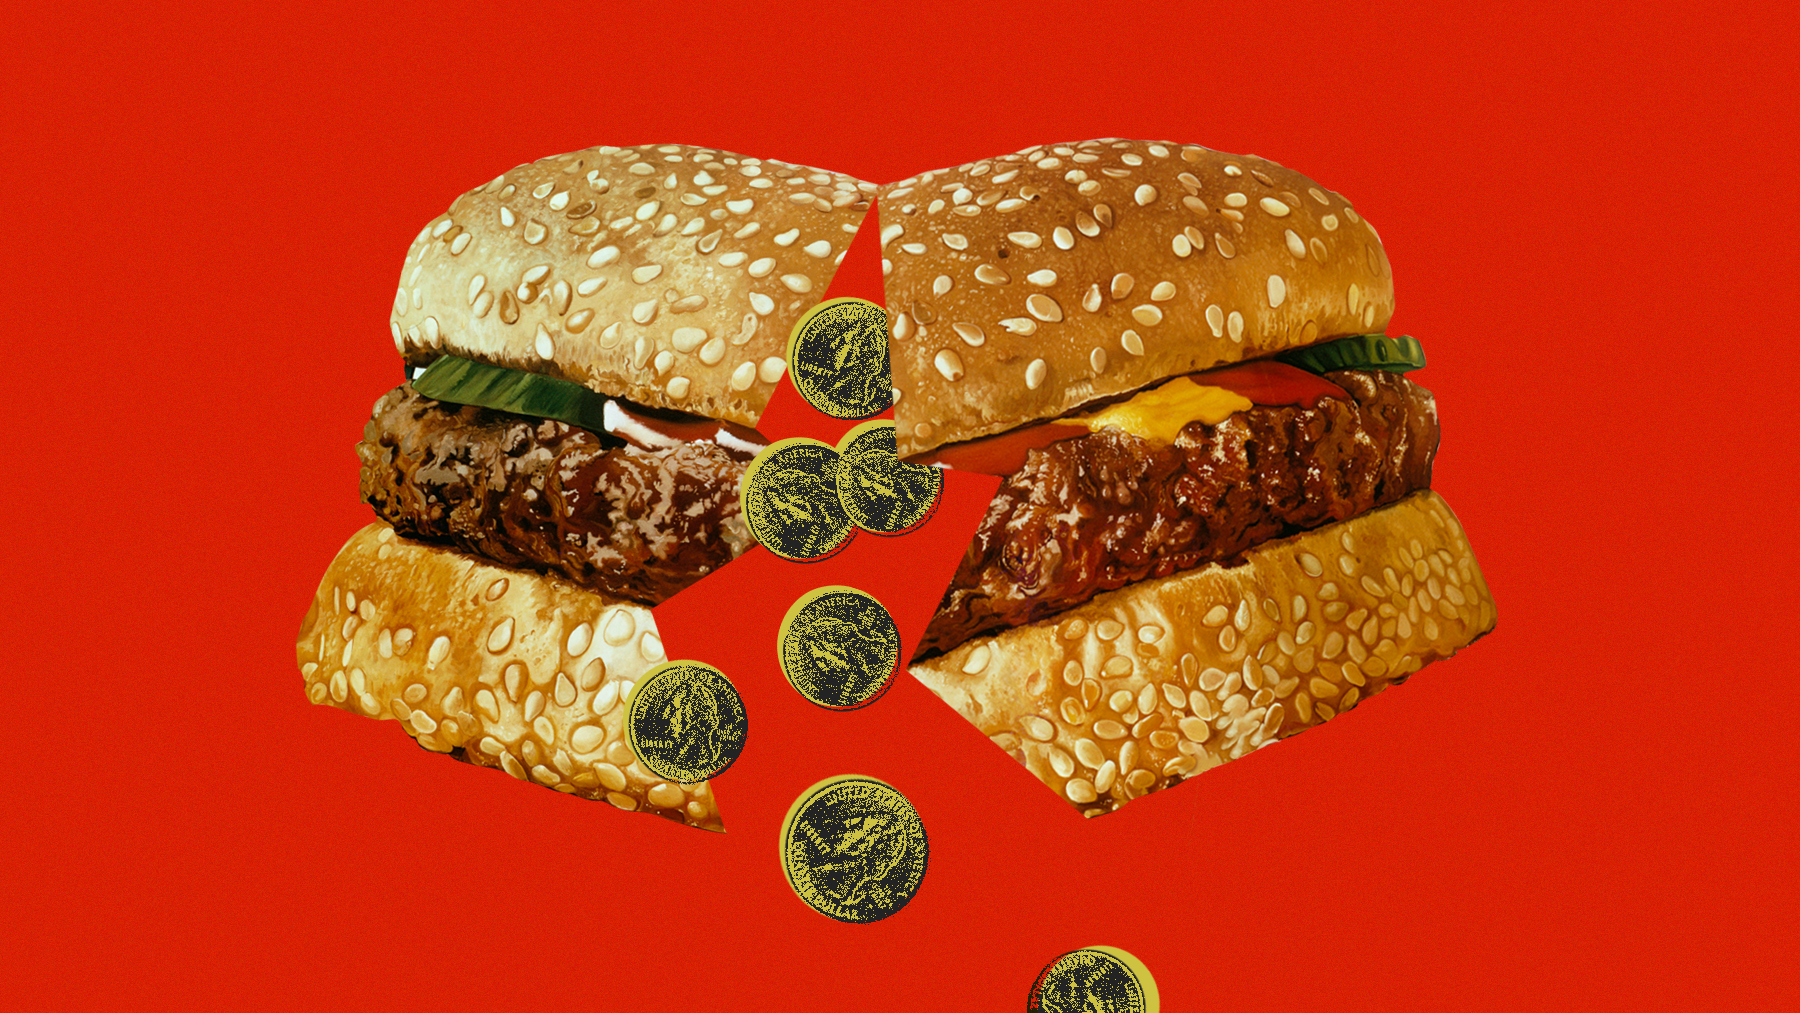 Photo collage of a fast food hamburger cracked open like an egg and spilling out coins.